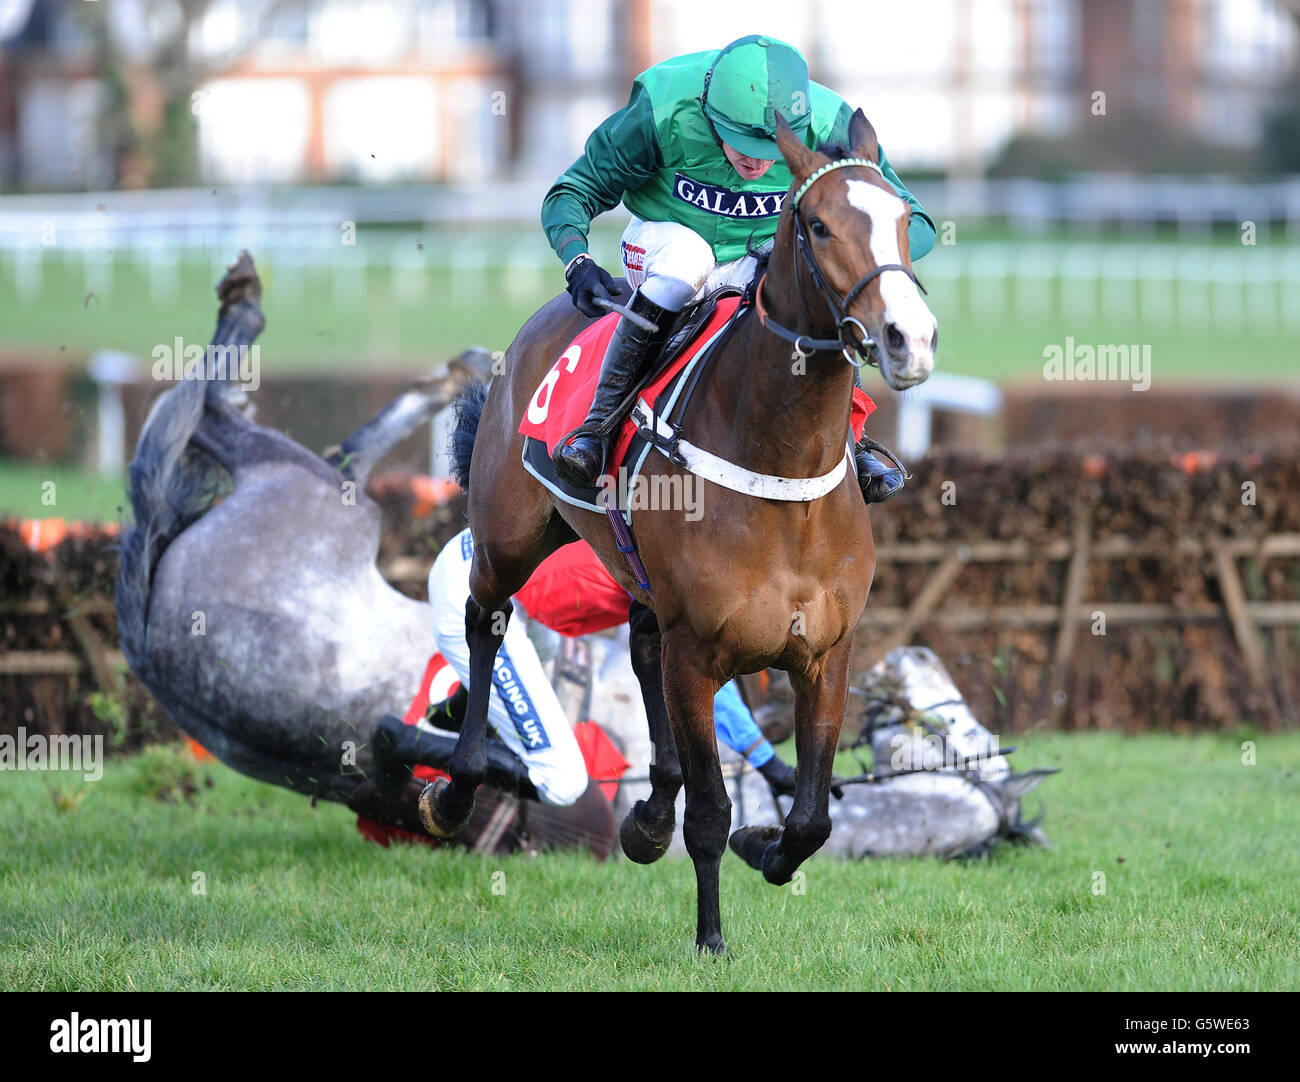 Utopie Des Bordes ridden by Barry Geraghty clears the last fence as Twigline ridden by Rubt Walsh falls in the Jane Seymour Mares' Novices' Hurdle Race(Listed) on Royal Artillery Gold Cup Day at Sandown Park Racecourse Stock Photo